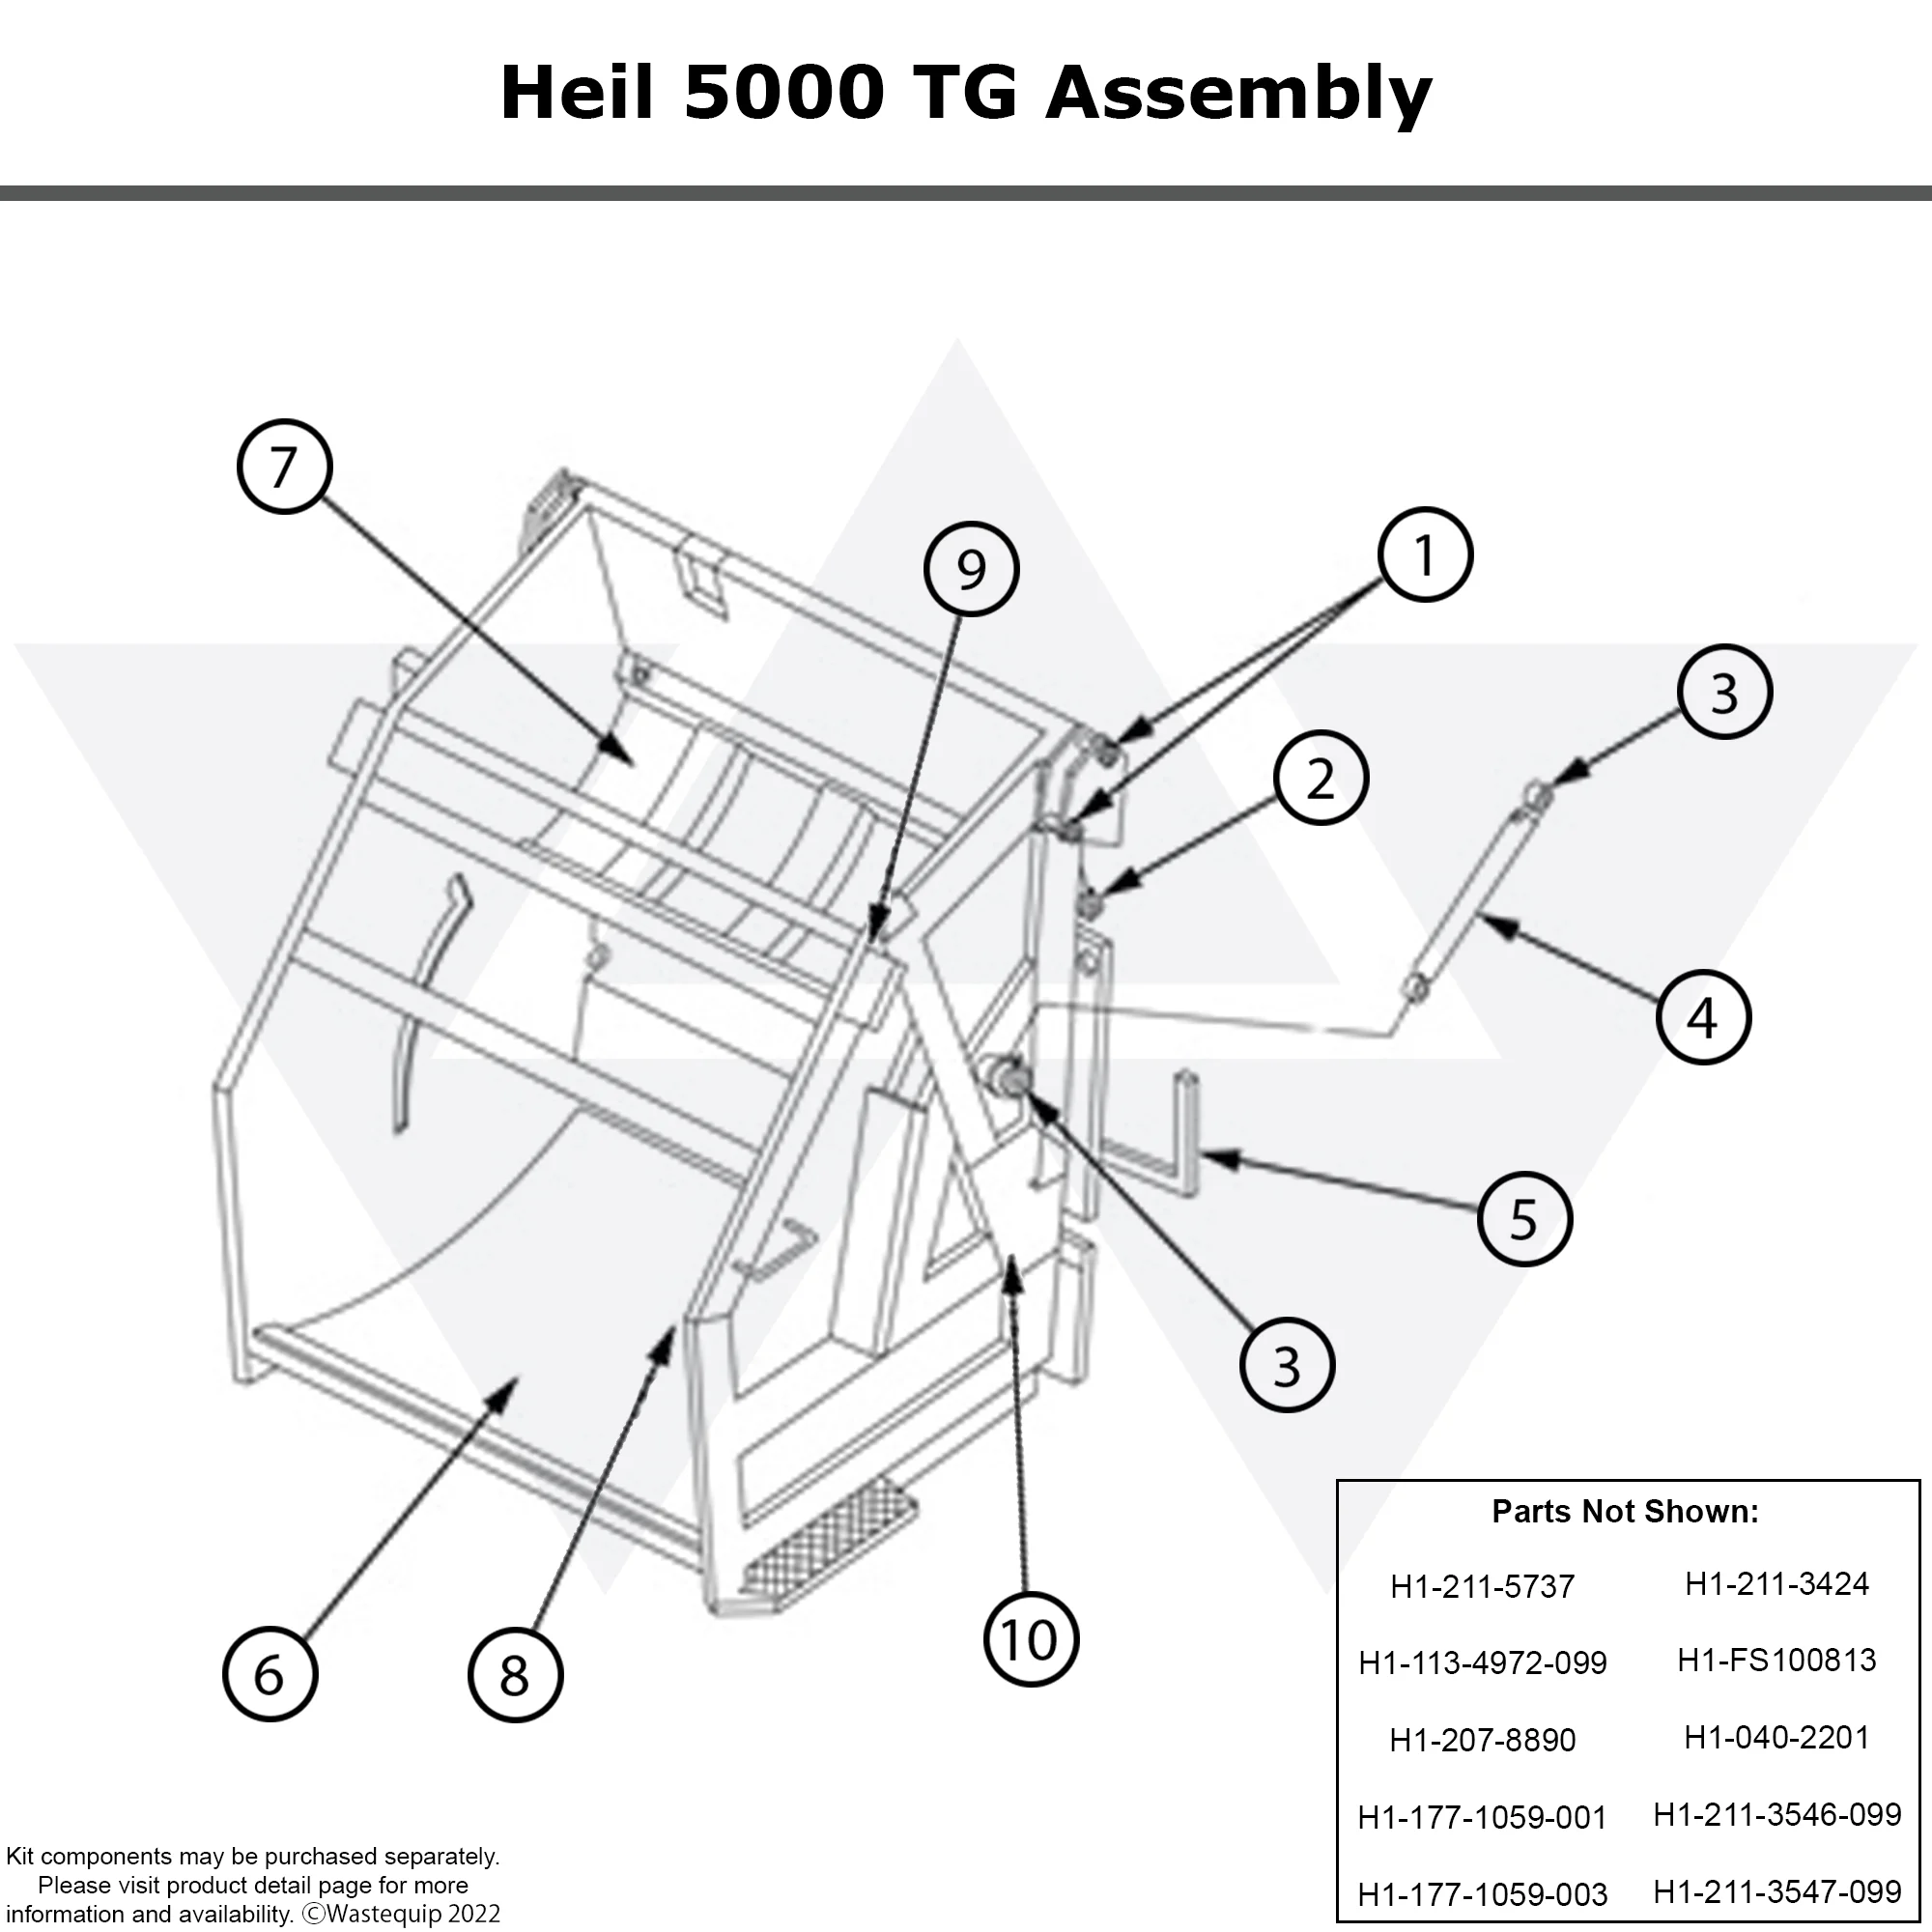 Wastebuilt® Replacement for Heil 5000 Tailgate Parts